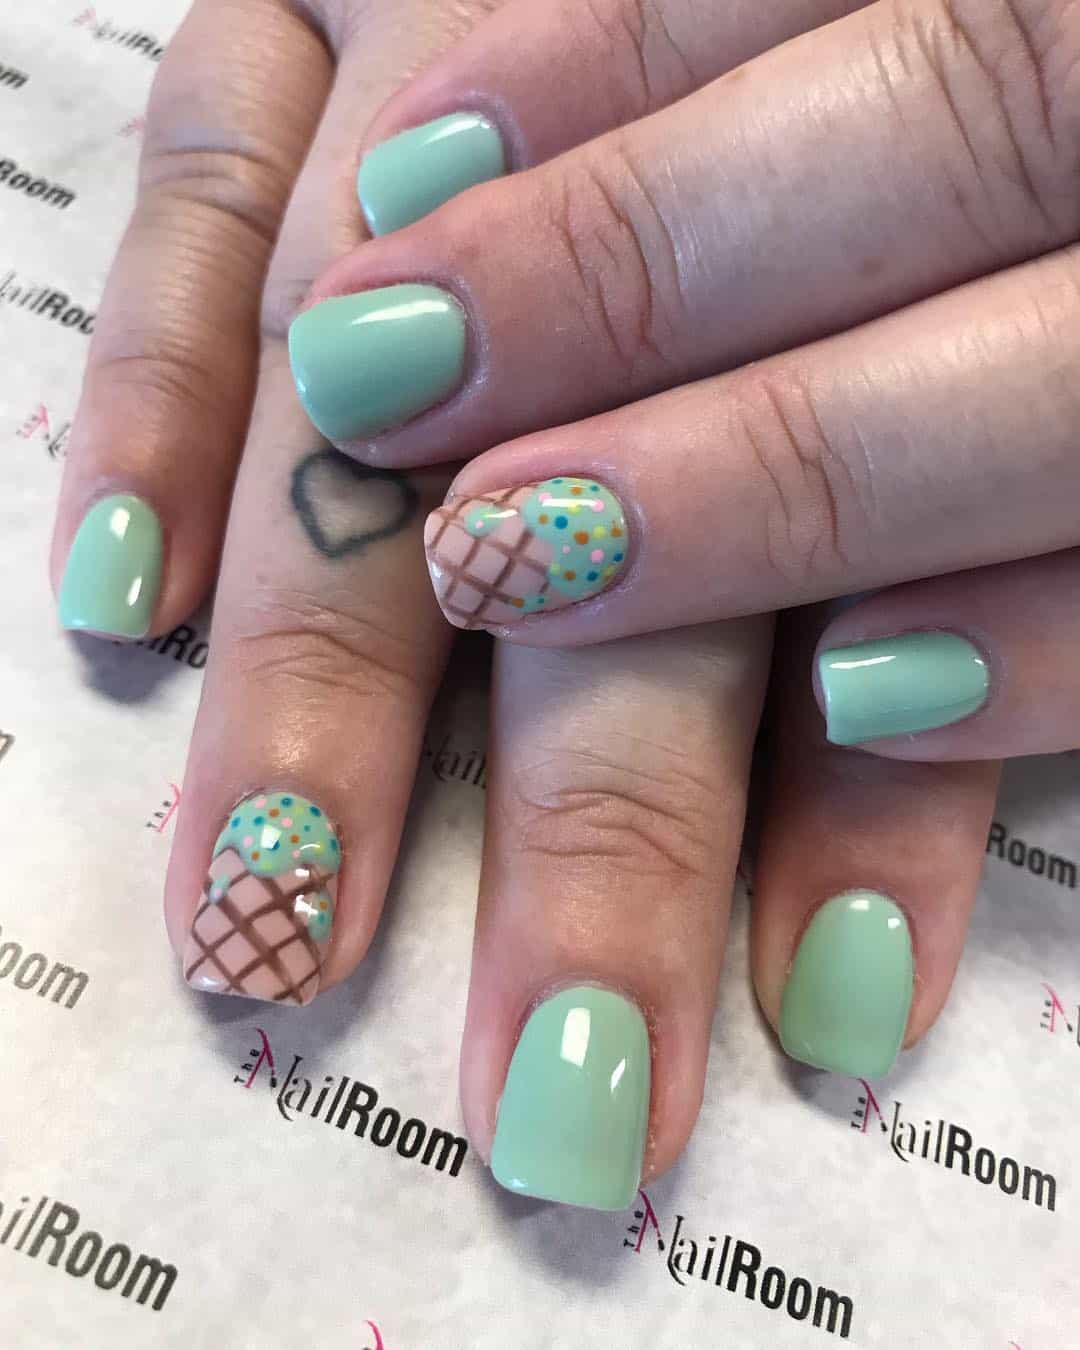 22 Ice Cream Nail Art Ideas You'll Want To Try!